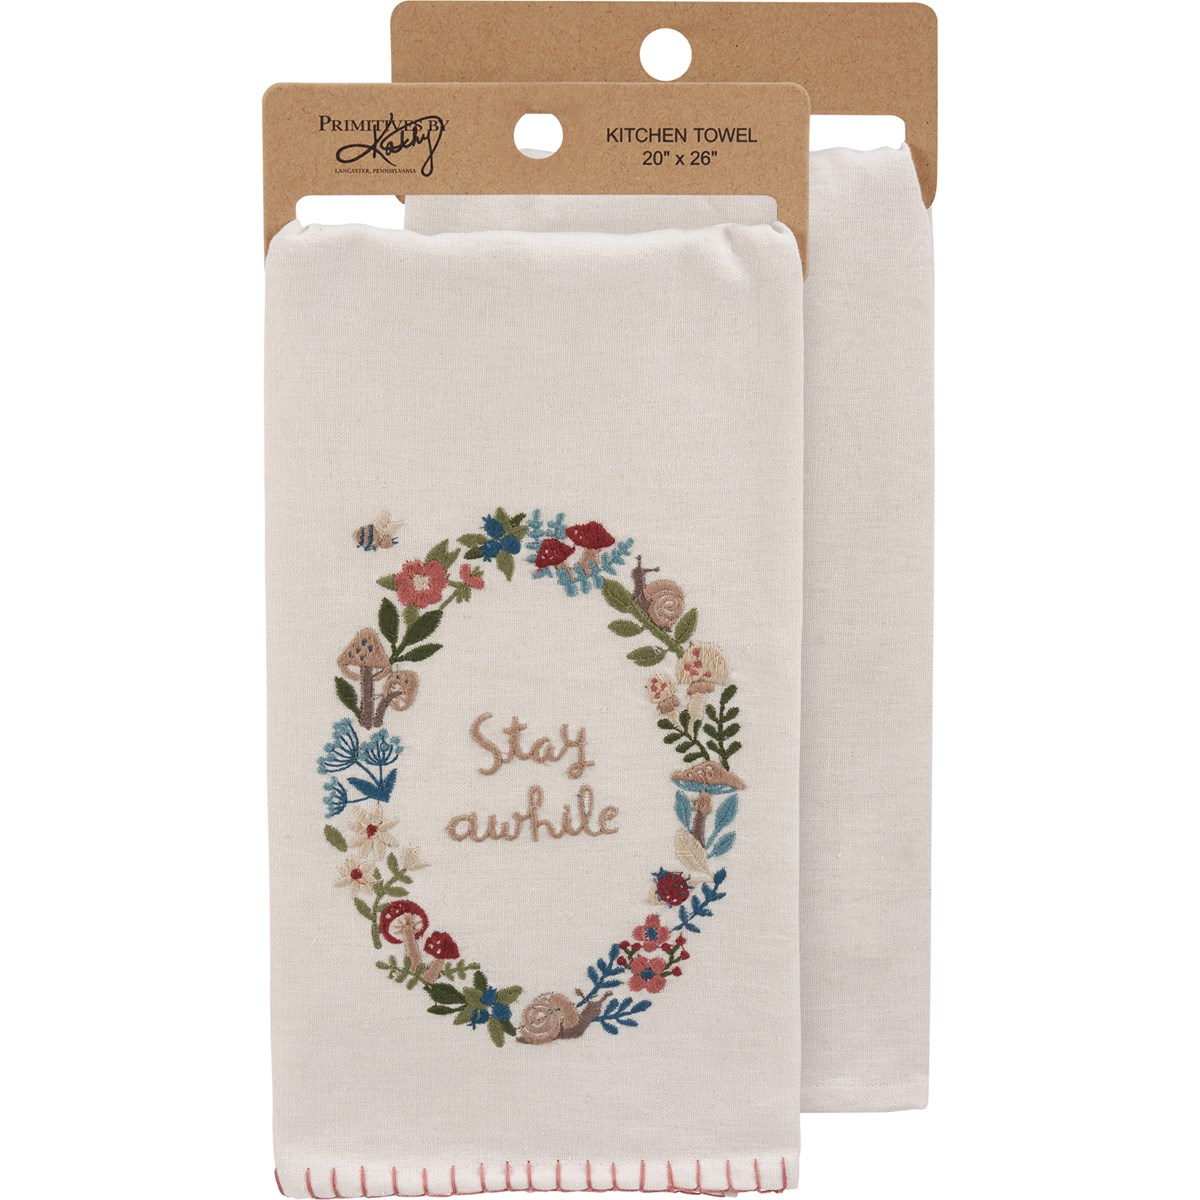 Stay Awhile Floral Cottagecore Kitchen Towel